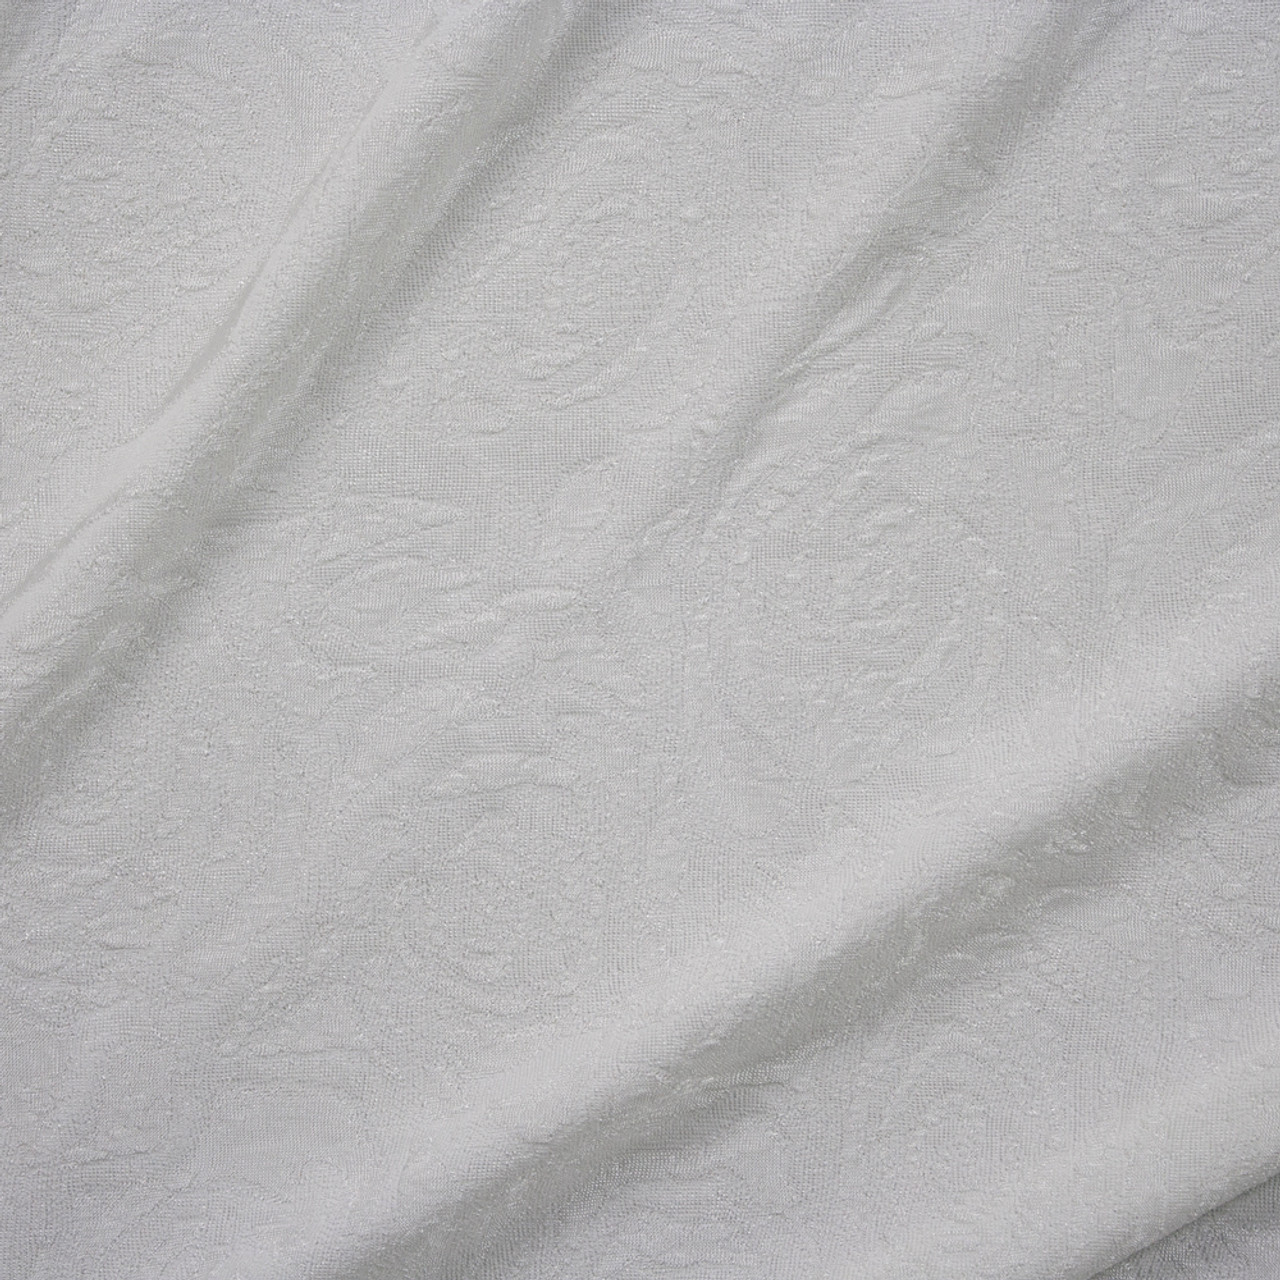 Cali Fabrics Warm White Floral Crepe Textured Double Knit Fabric